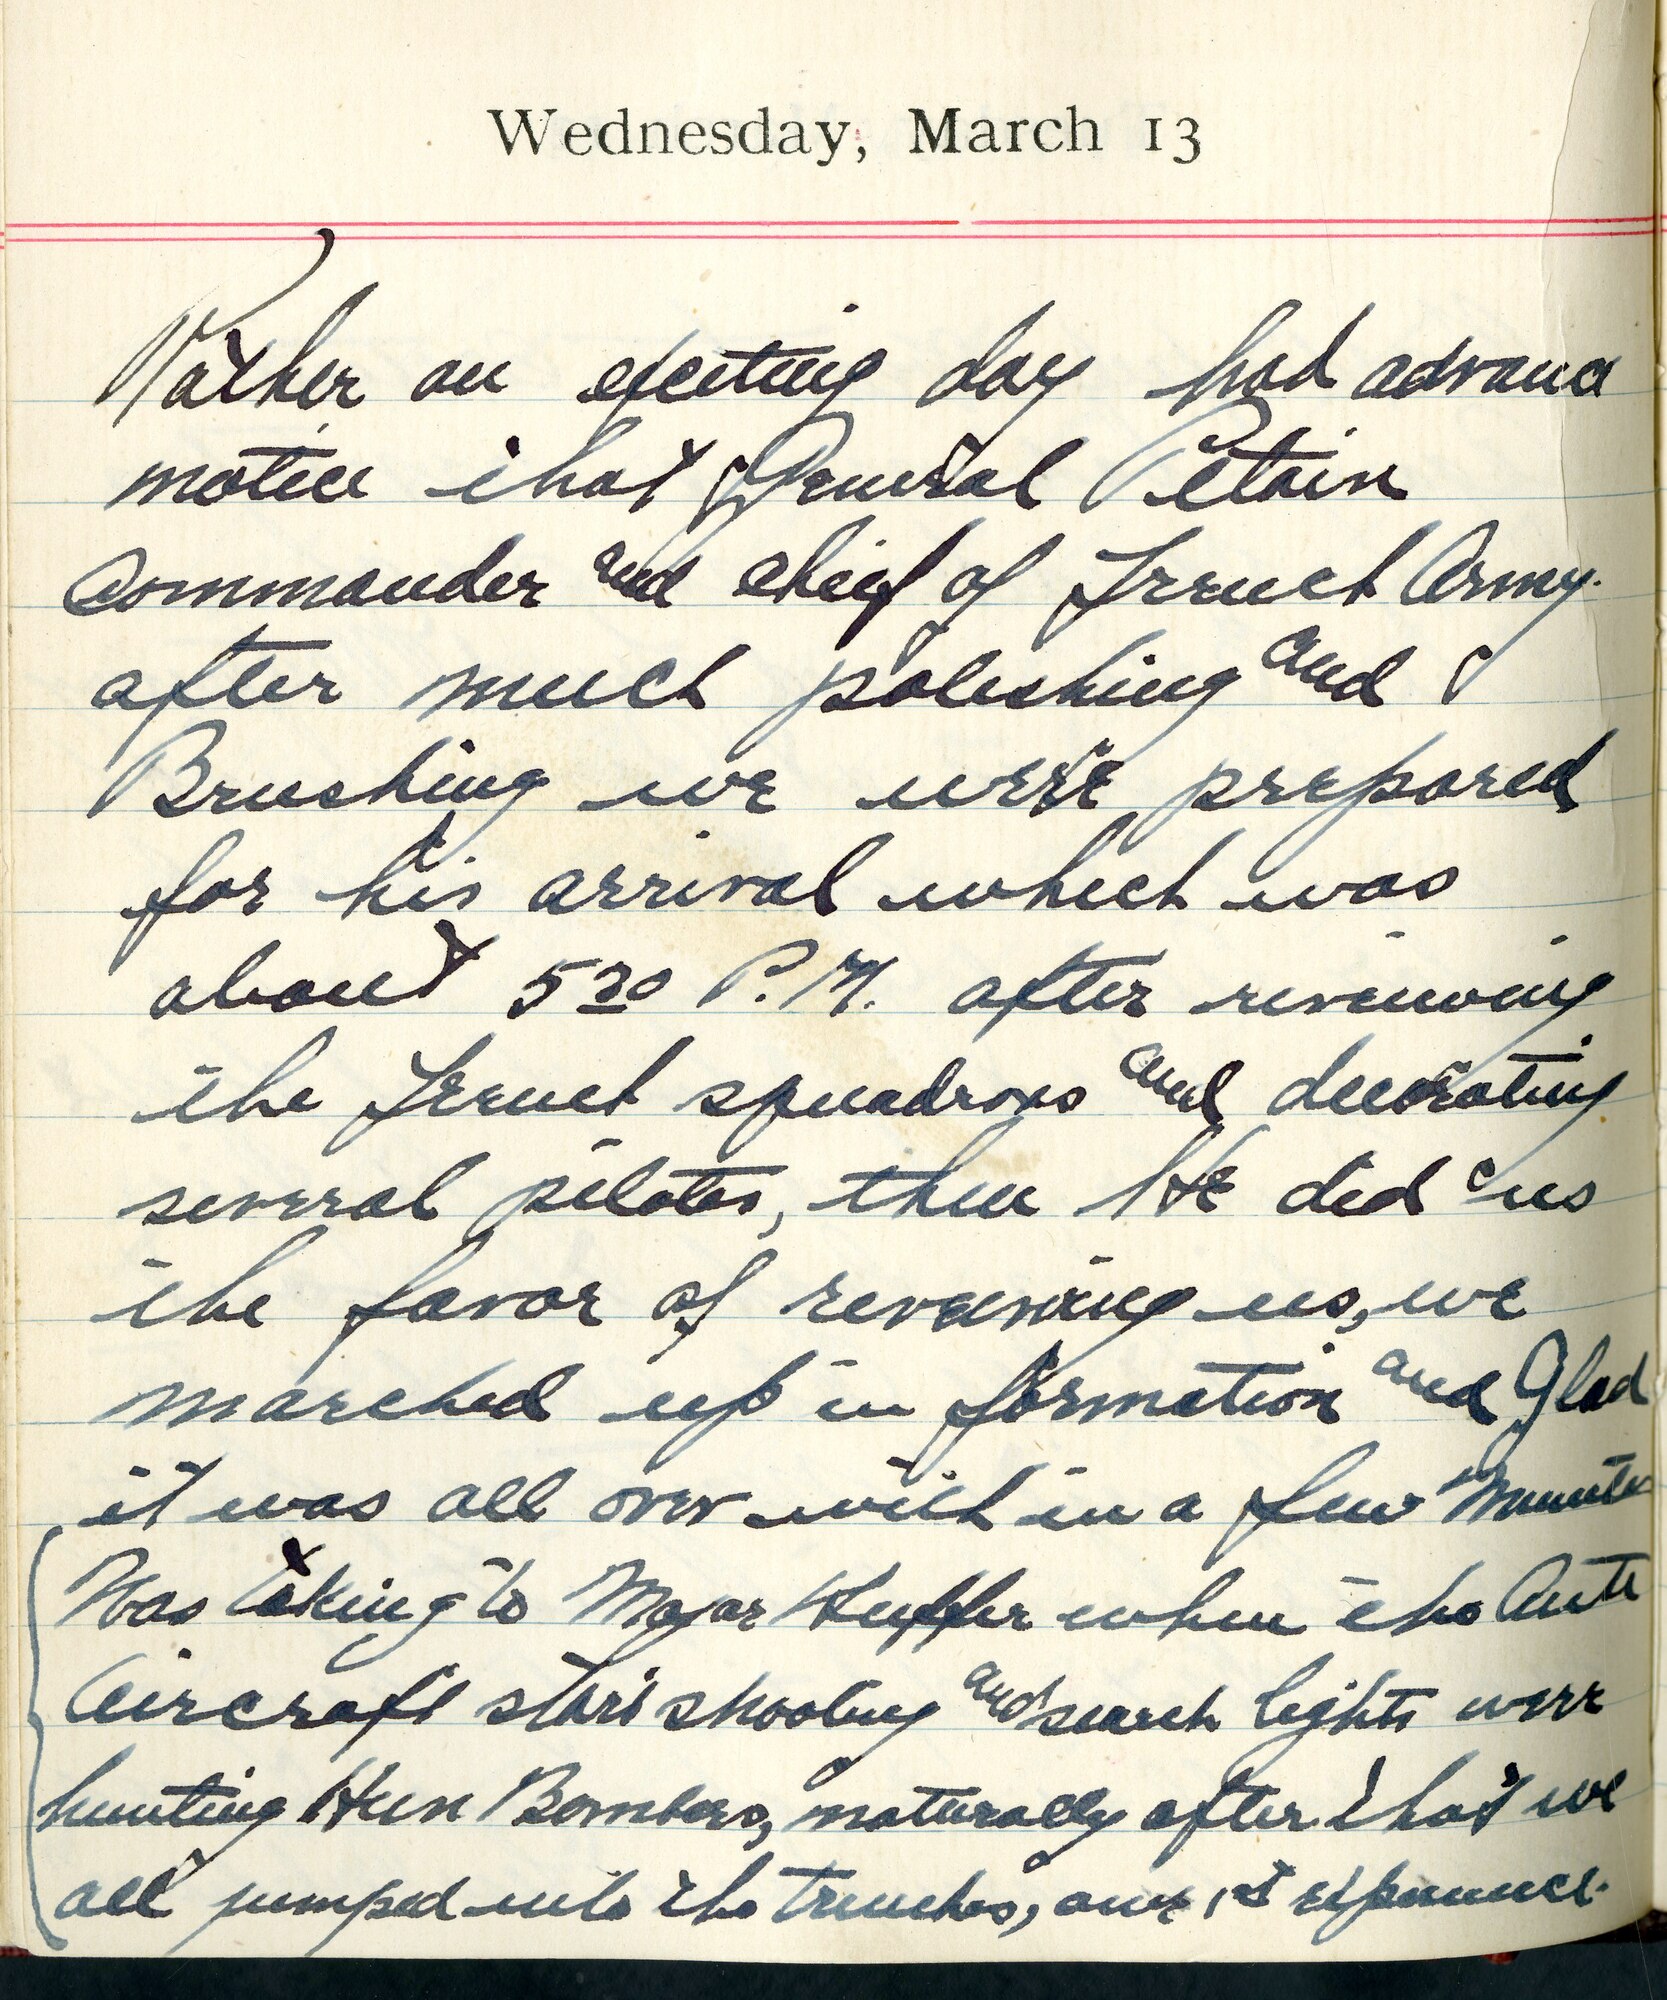 Capt. Edward V. Rickenbacker's 1918 wartime diary entry. (03/13/1918).

Rather an exciting day.  Had advance notice that General Petain, commander and chief of French Army.  After much polishing and brushing, we were prepared for his arrival which was about 5:30 P.M.  After receiving the French squadrons and decorating several pilots, then he did us the favor of receiving us, we marched up in formation and glad it was all over within a few minutes.  Was talking to Major Huffer when the antiaircraft started shooting and search lights were hunting Hun bombers.  Naturally after that we all jumped into the trenches, our 1st experience.